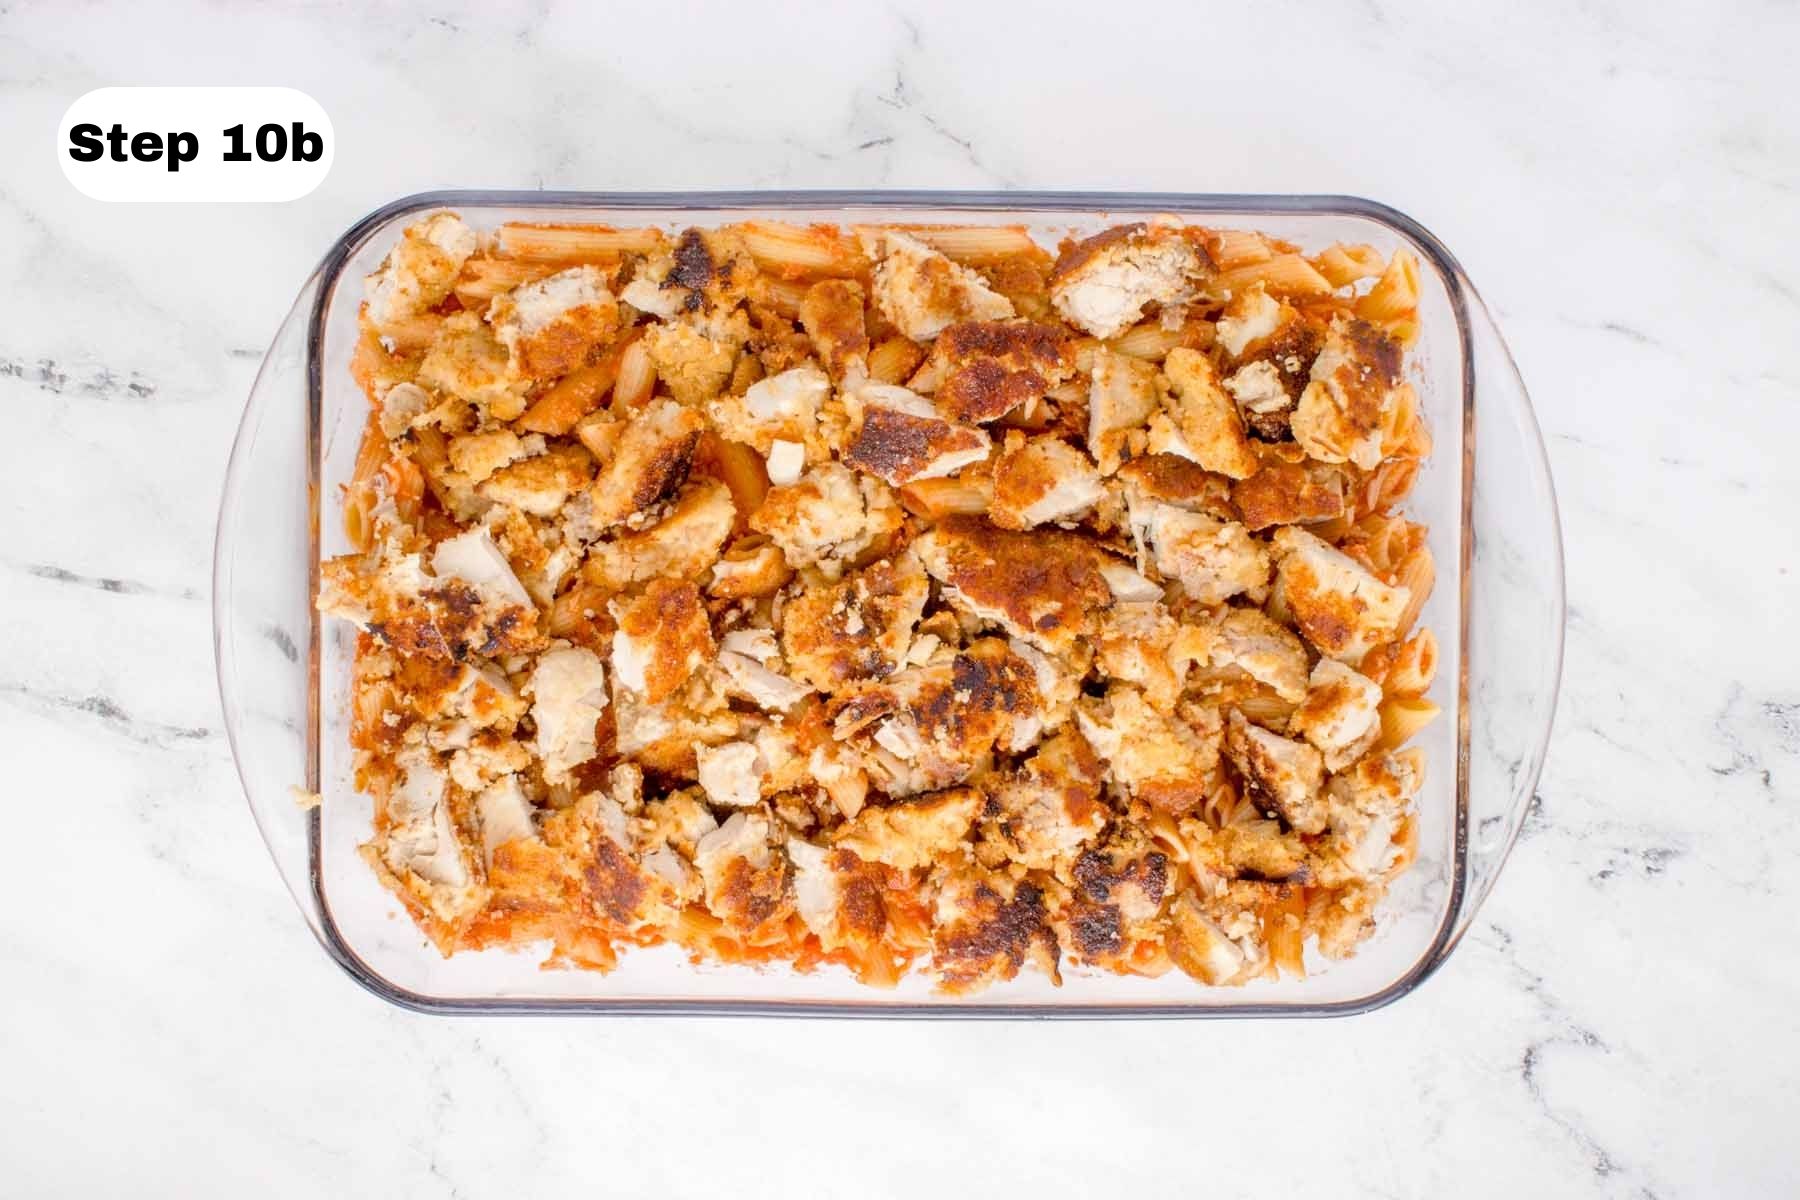 Cooked chicken thigh pieces layered on top of pasta in a glass baking dish.